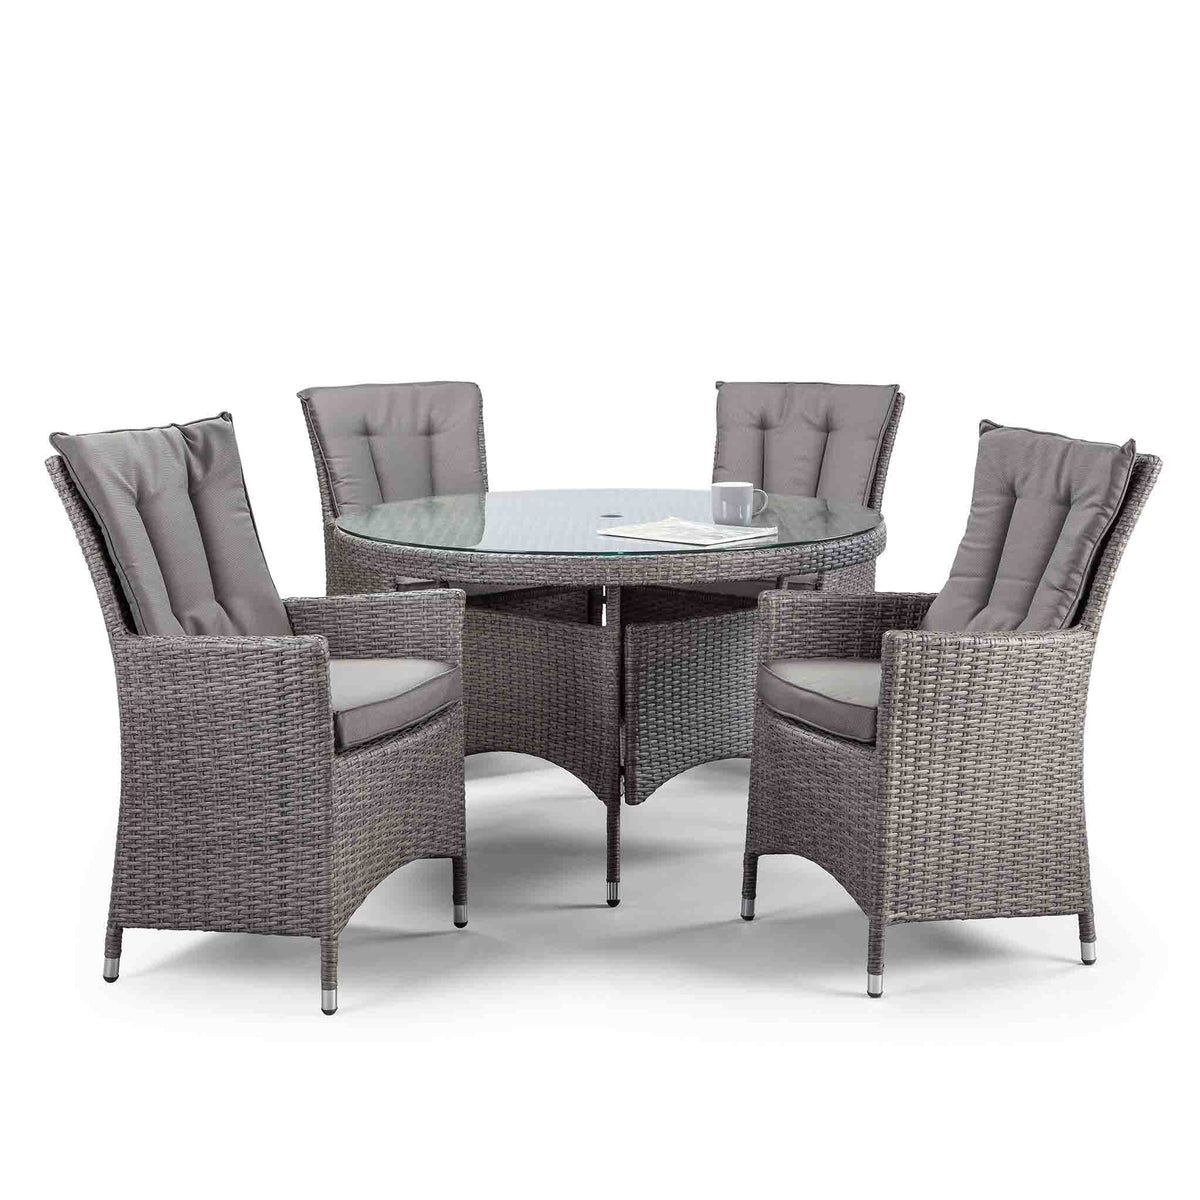 Palma 120cm Round Grey Rattan Dining Table with 4 Armchairs